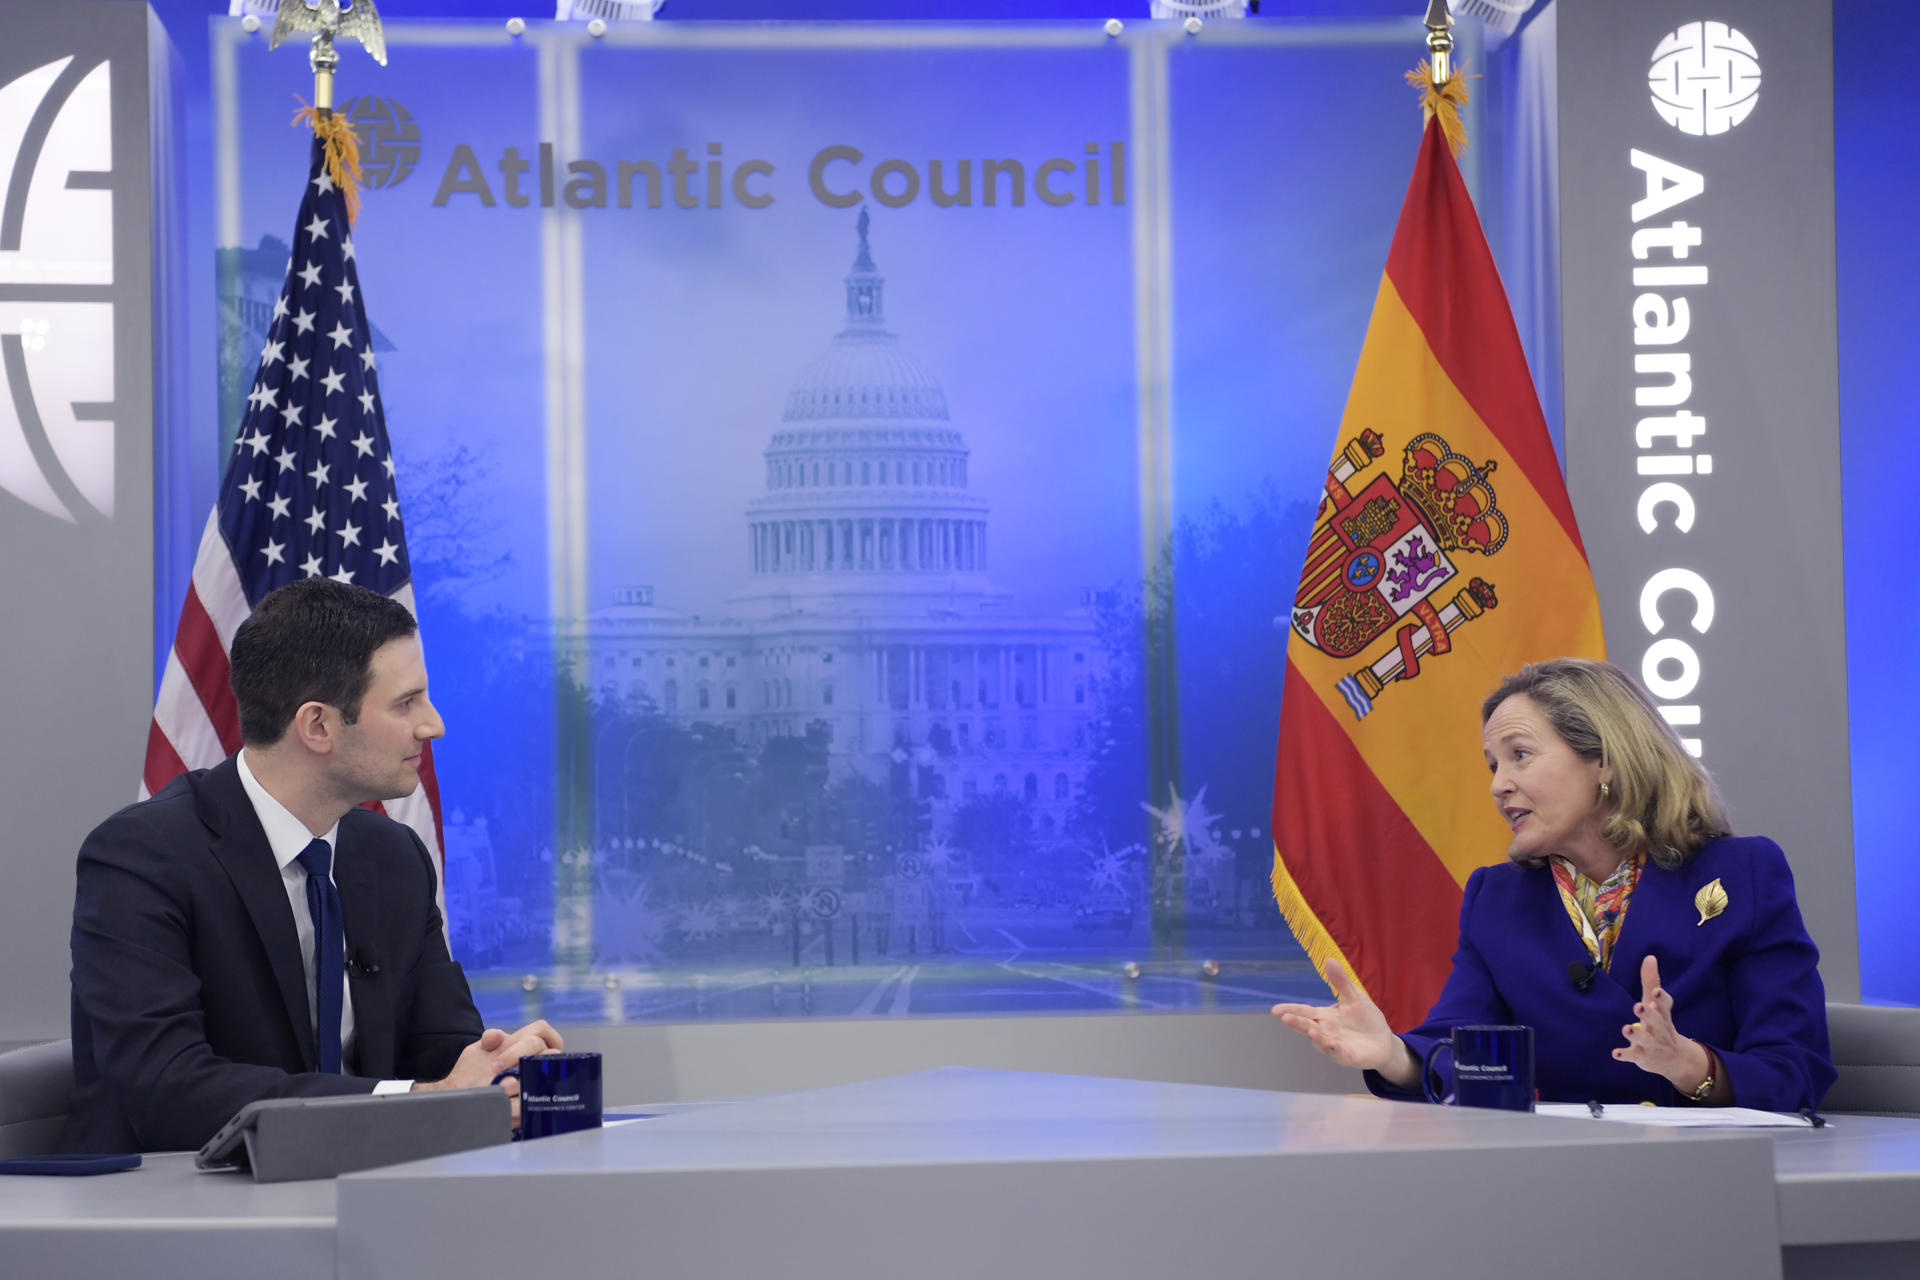 Spanish Deputy Prime Minister and Economy Minister Nadia Calviño responds to questions from the head of Geoeconomics at the Atlantic Council, John Lipsky, during an event organized in Washington on April 11, 2023. EFE/Lenin Nolly